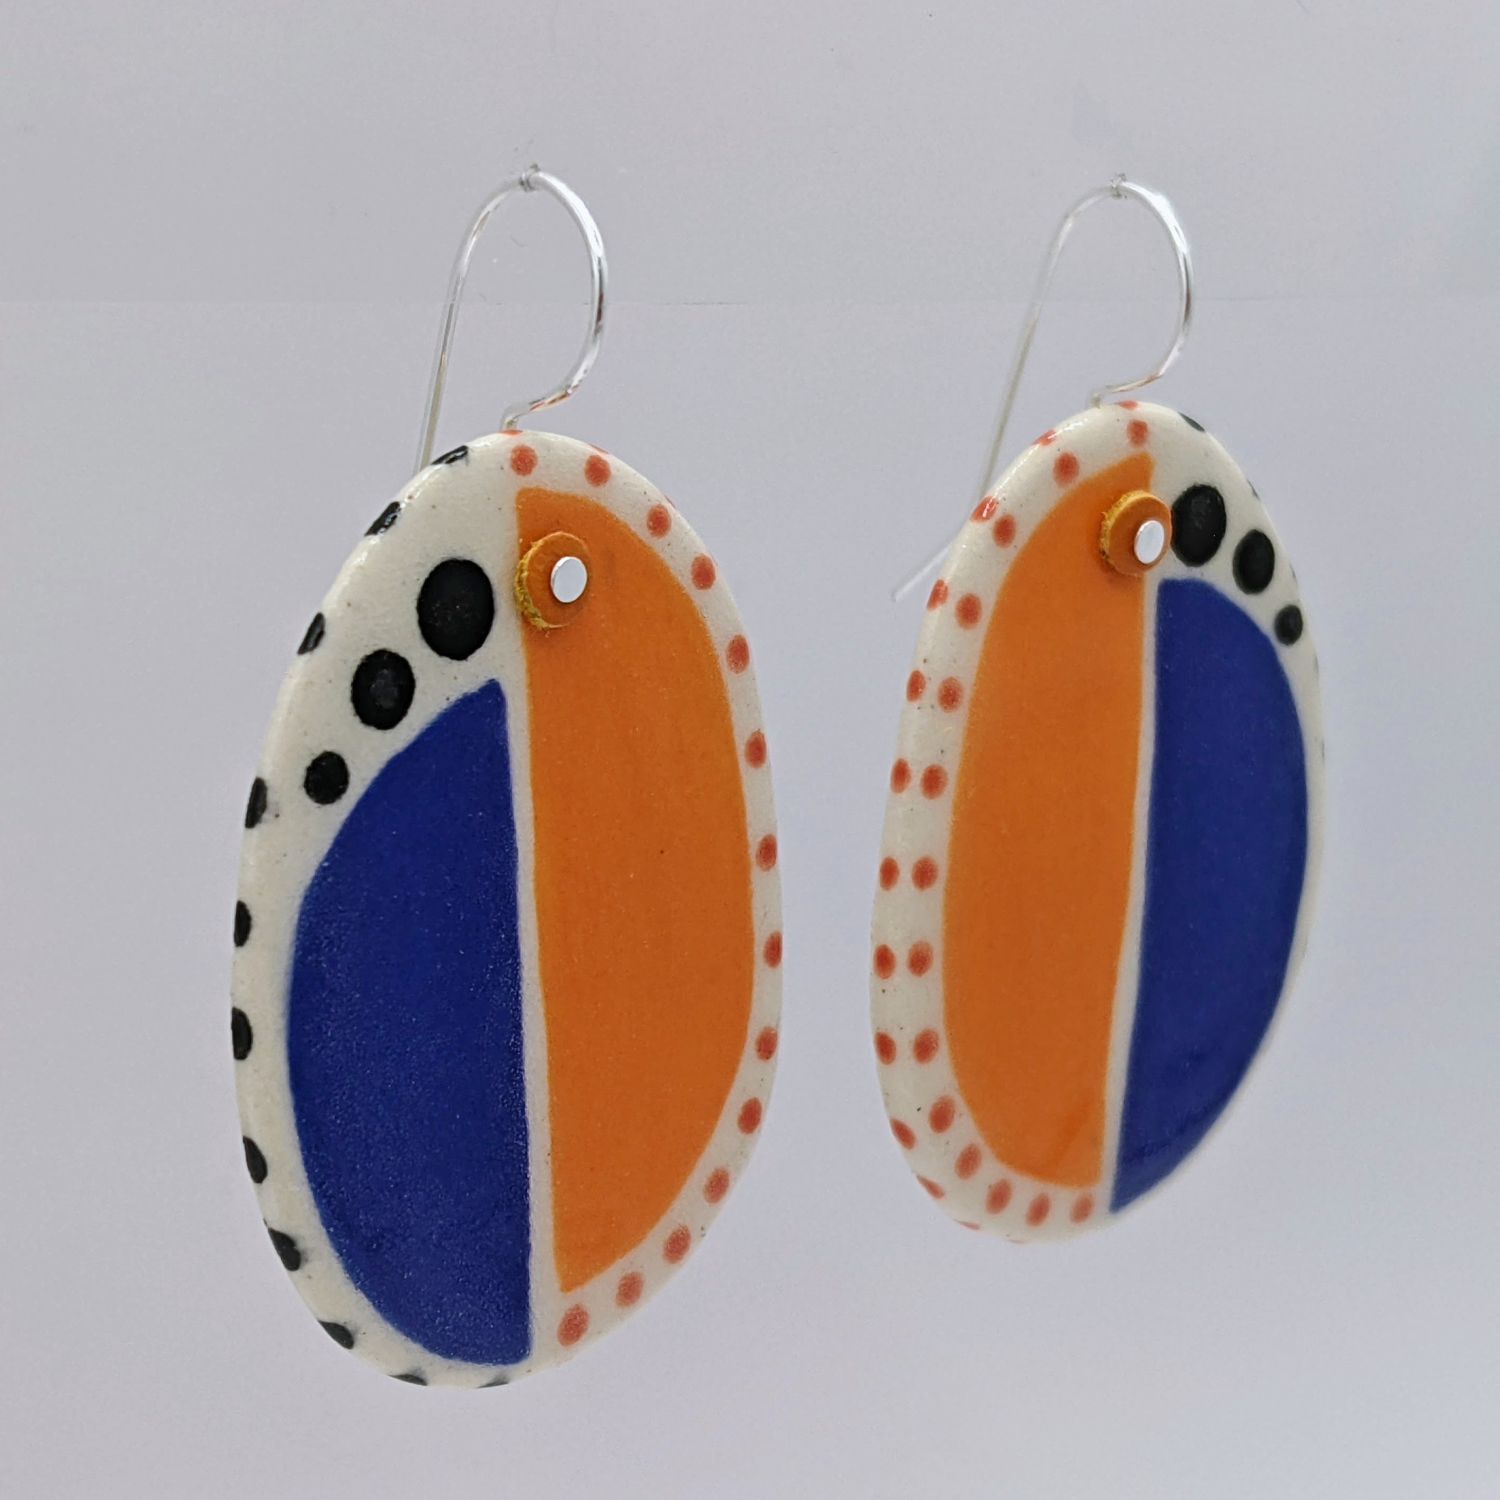 Here and Here: Half Blue and Half Orange Ceramic Disc Earrings Product Image 4 of 4